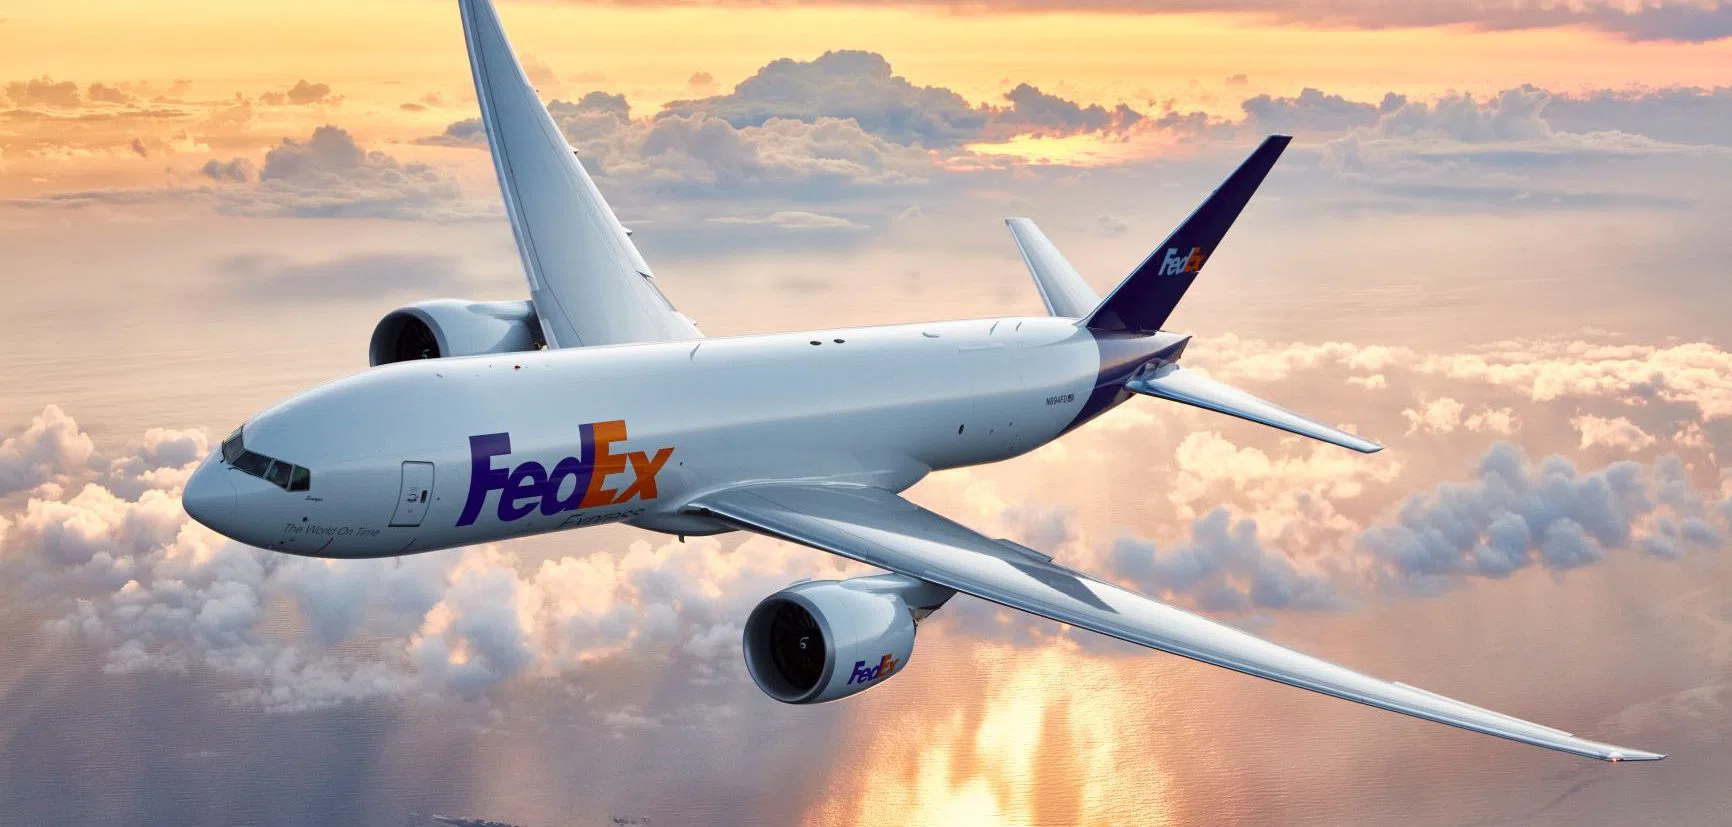 Ship your hard drive, SSD, or device to Seattle Data Recovery With FedEx